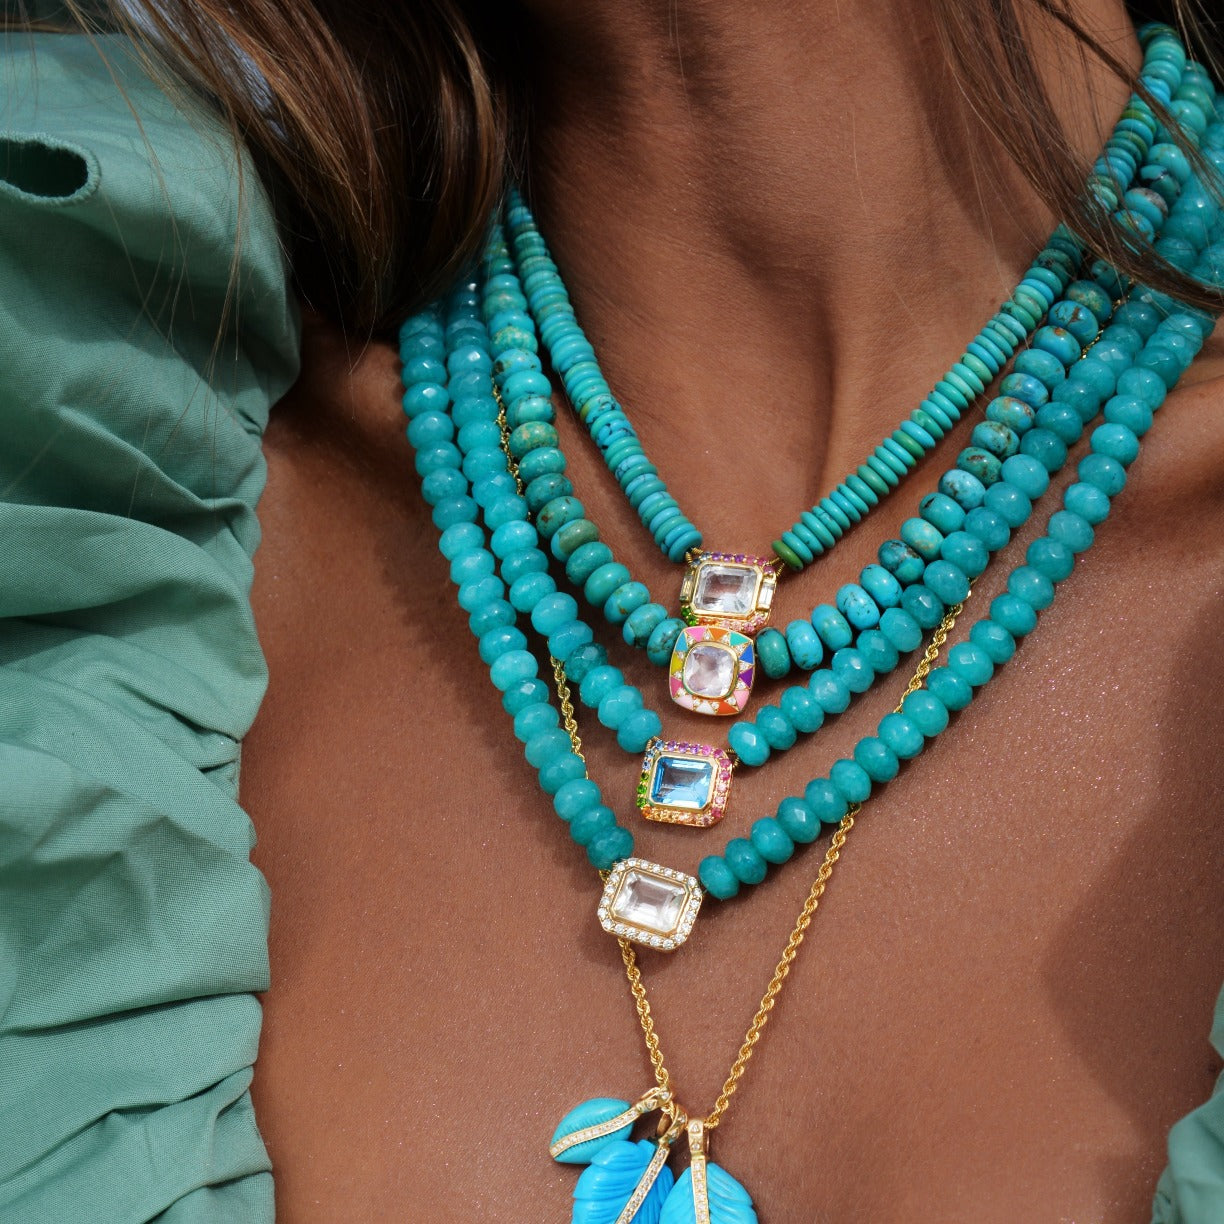 Molly necklace in Amazonite stone, 14k gold, crystal and multi-colored stones